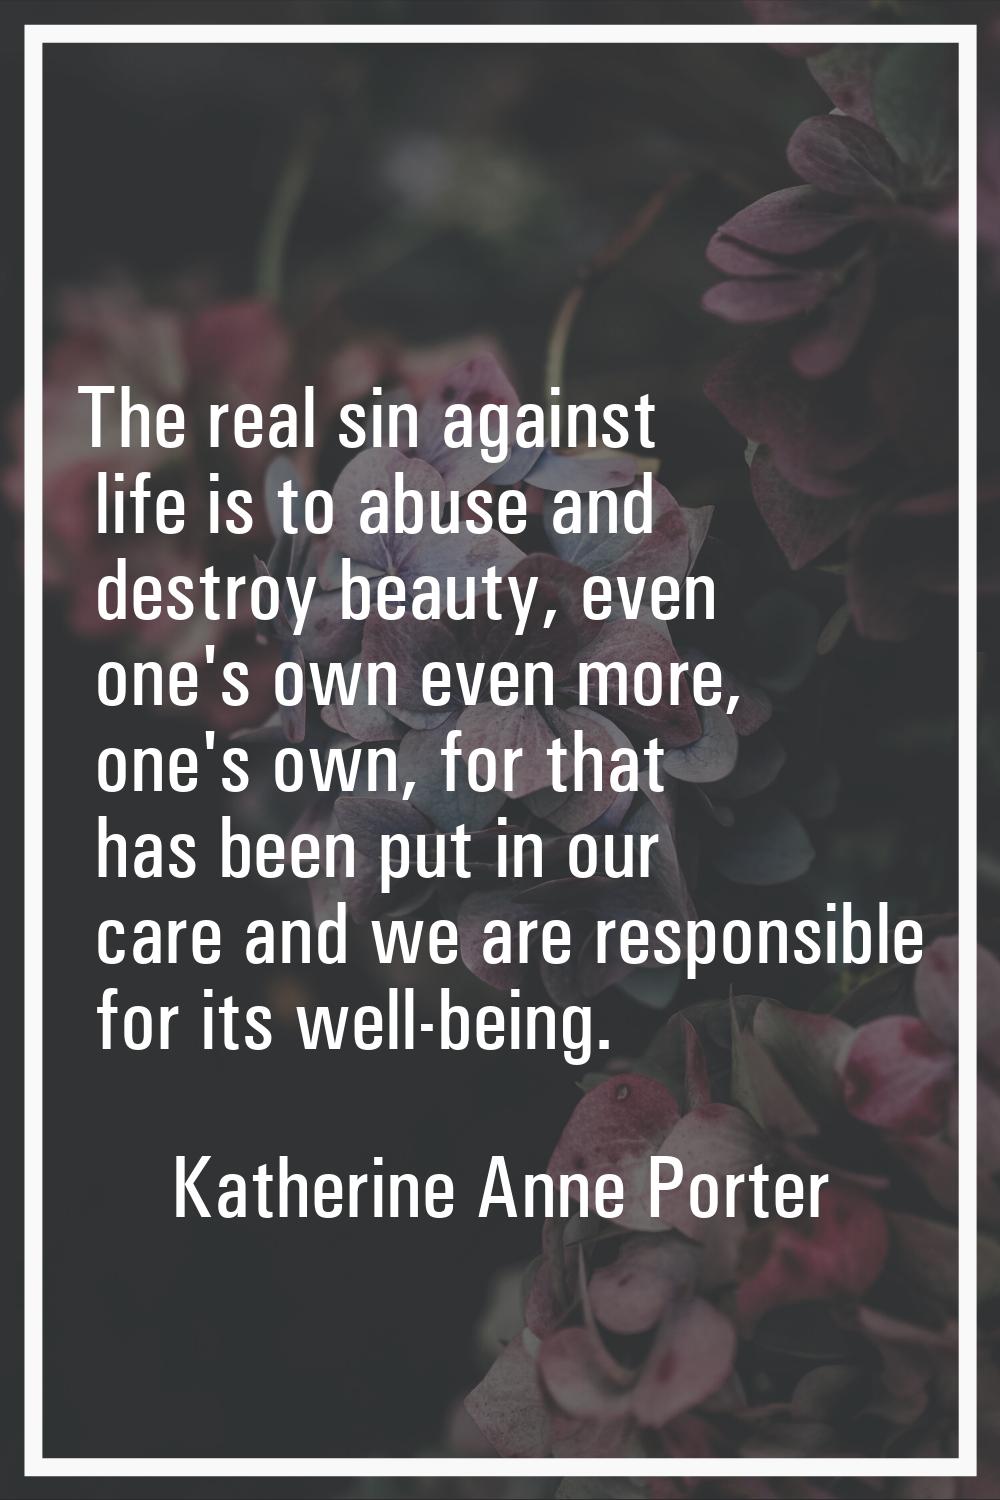 The real sin against life is to abuse and destroy beauty, even one's own even more, one's own, for 